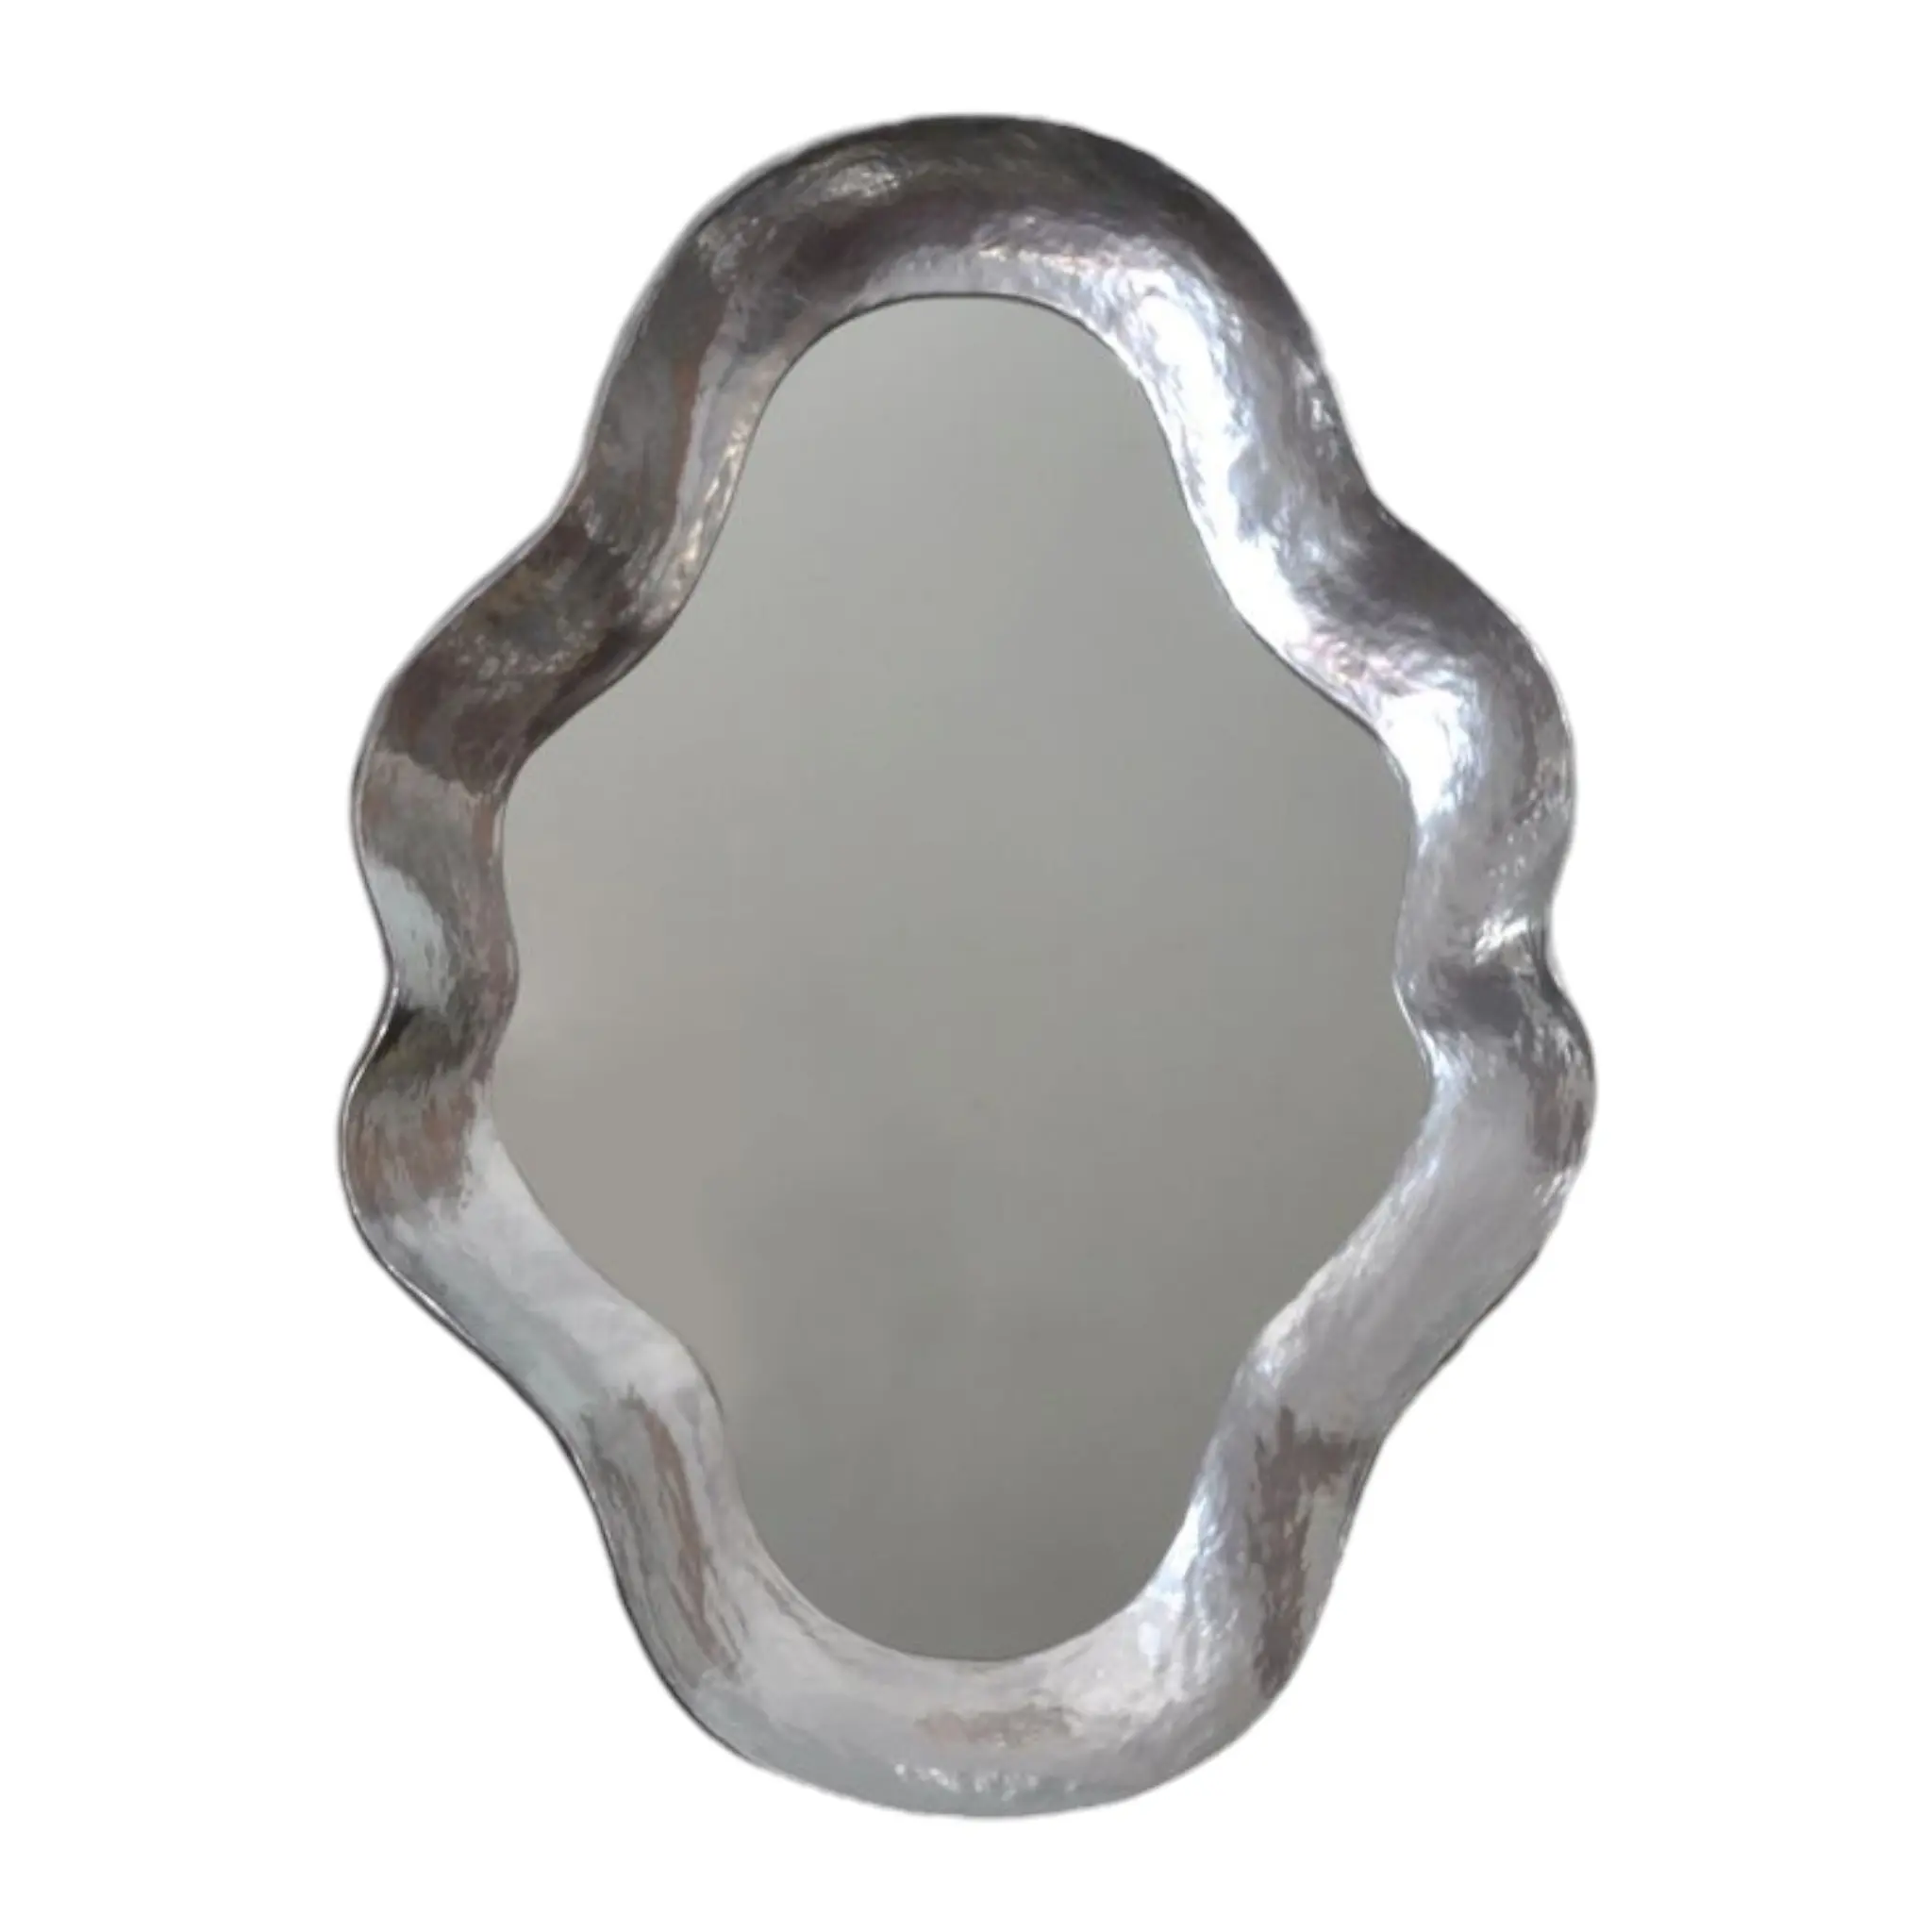 Trending Unique Design Wall Mirror Metal Frame Wall mirrors Home Decor For Home Hotel Restaurant Decoration